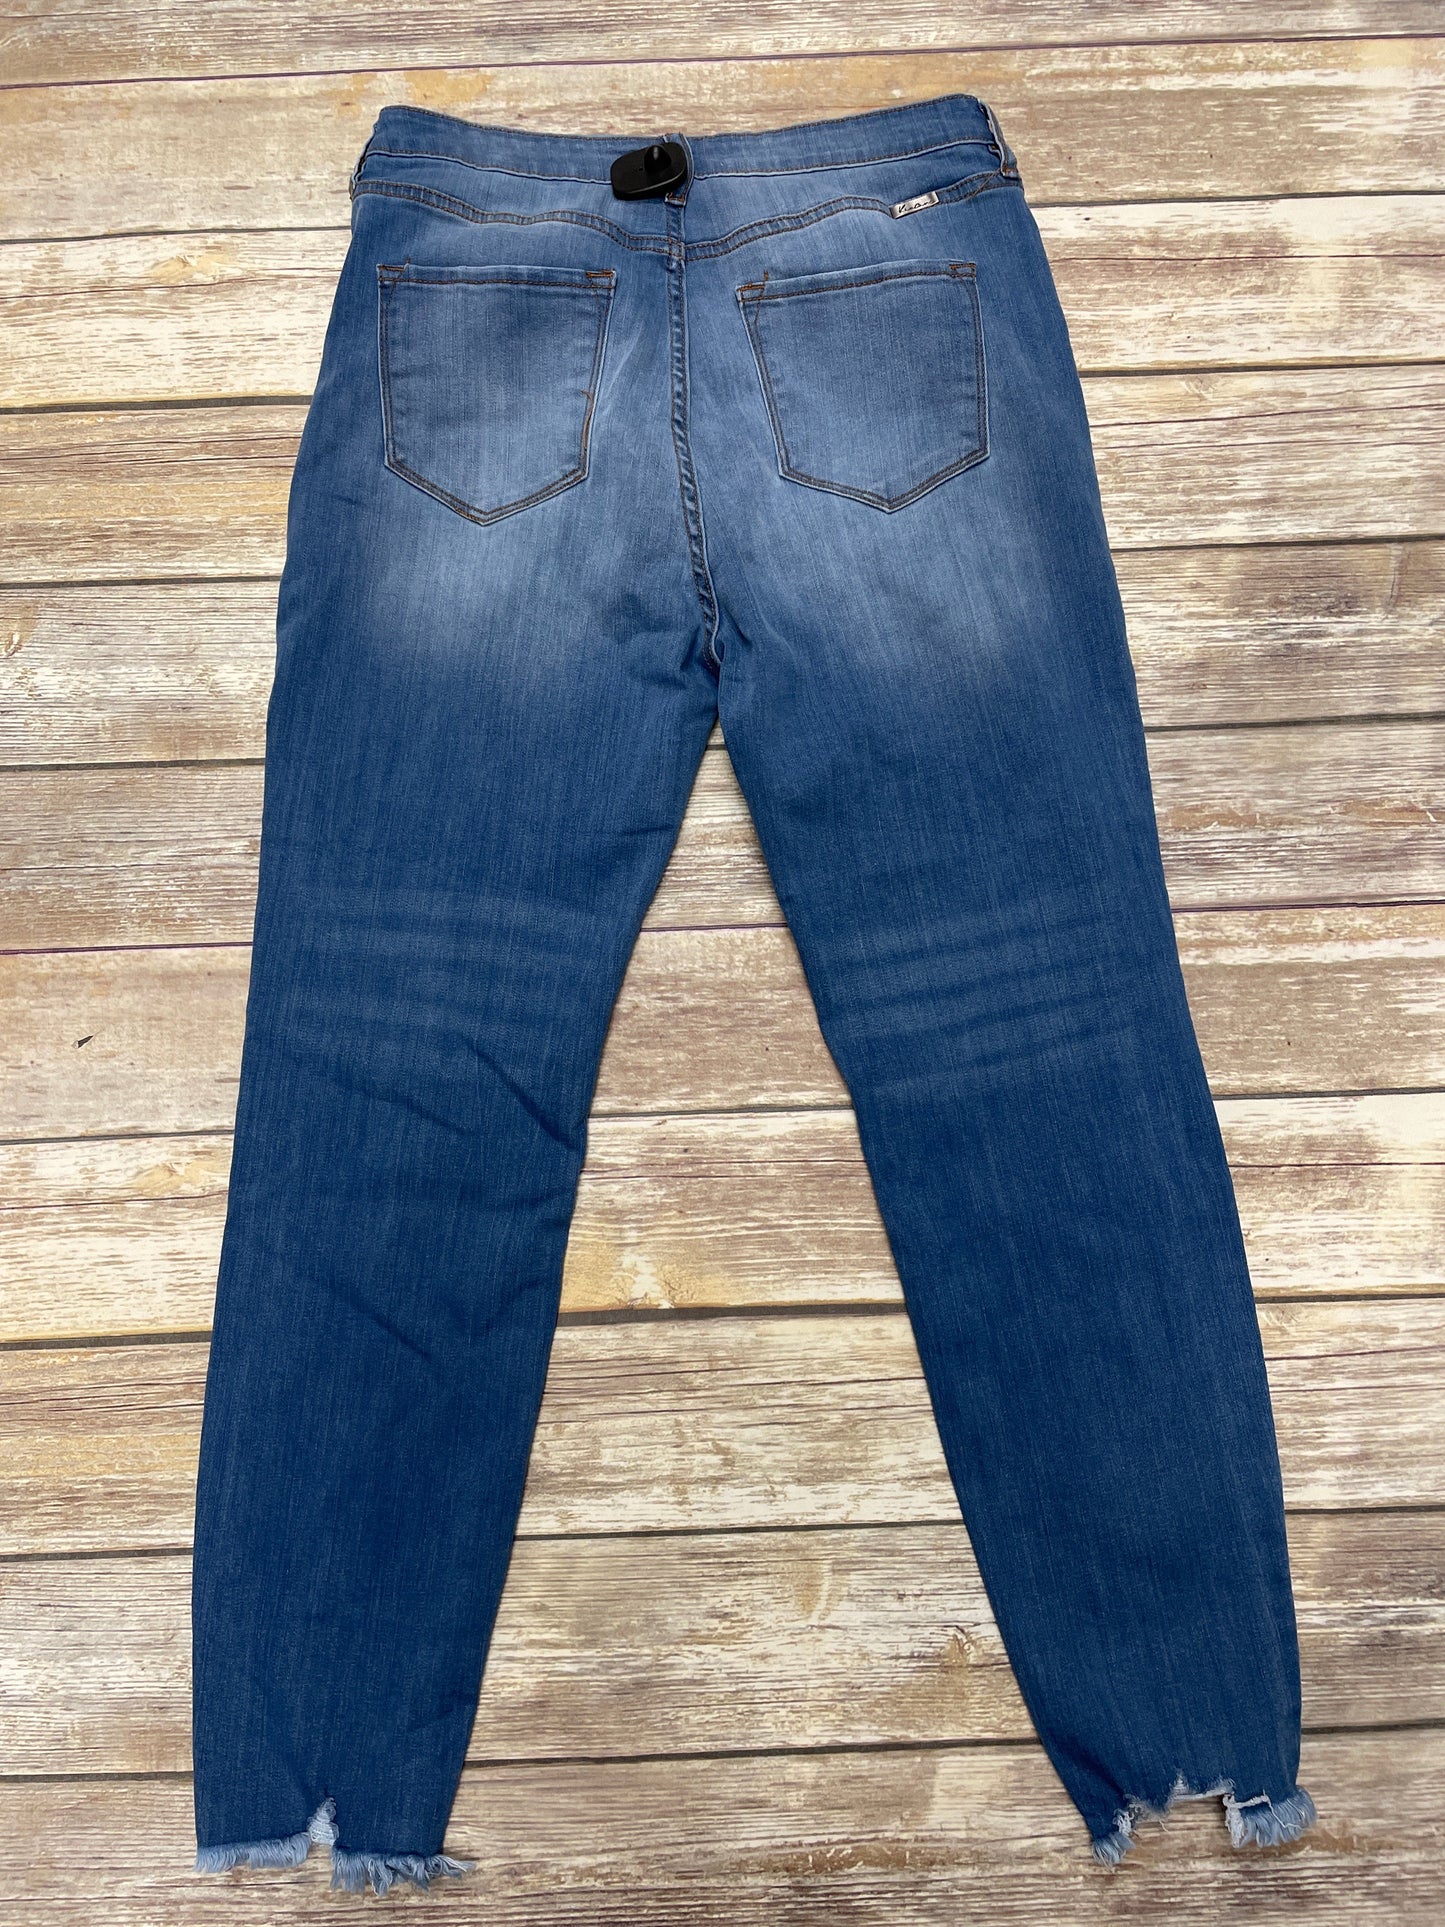 Jeans Skinny By Kancan  Size: 12 (13/30)